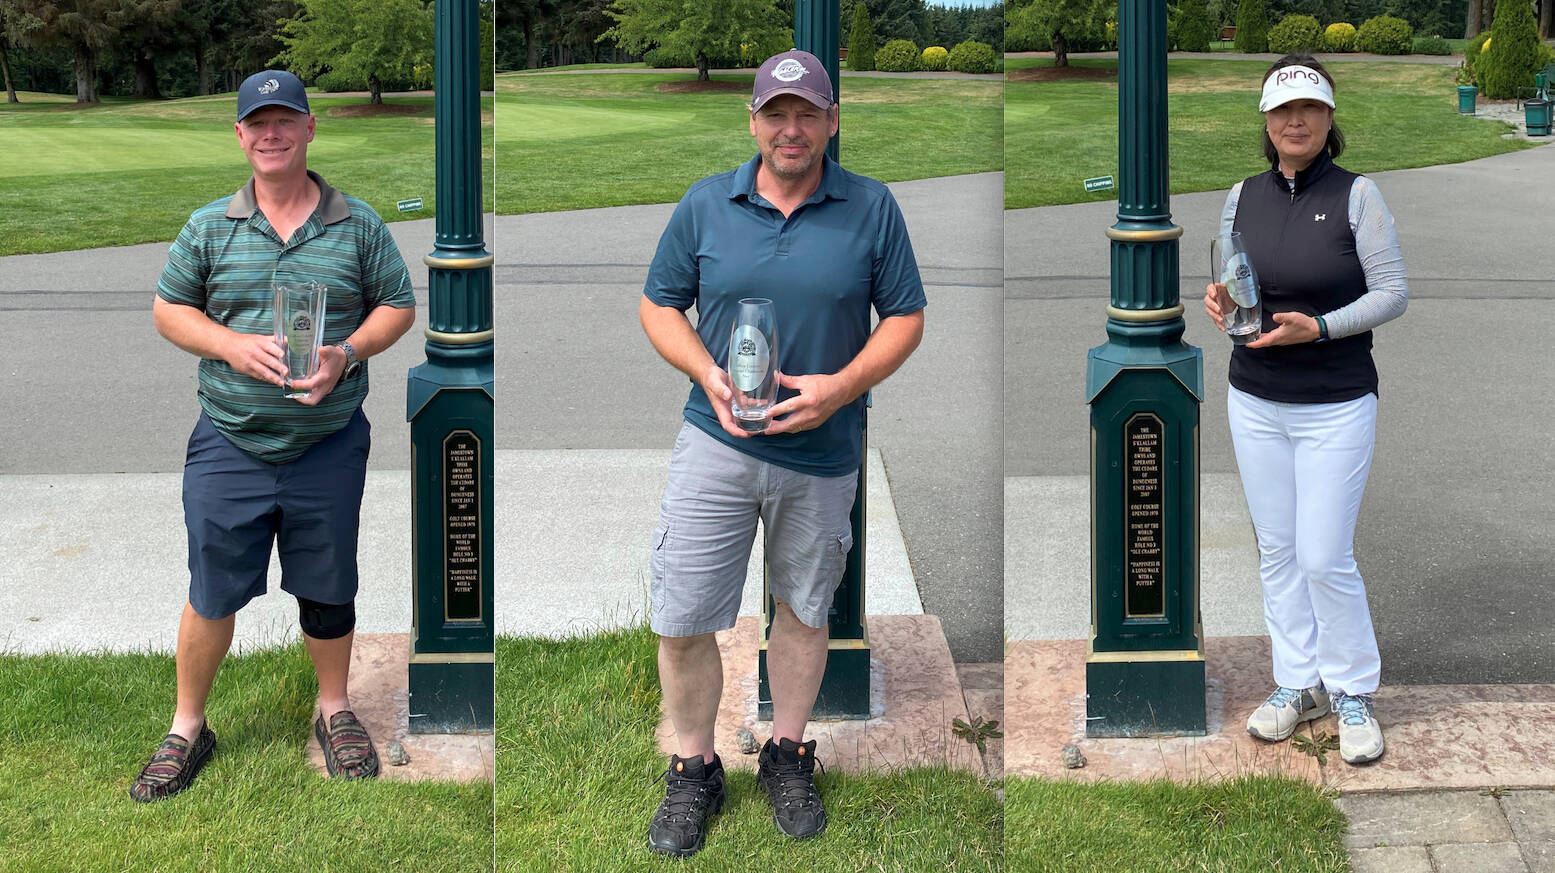 From left, Daniel St. John was the overall gross winner of the Clallam County golf tournament held at Cedars at Dungeness, while Rob Price and Yoon Park tied for the best net score.